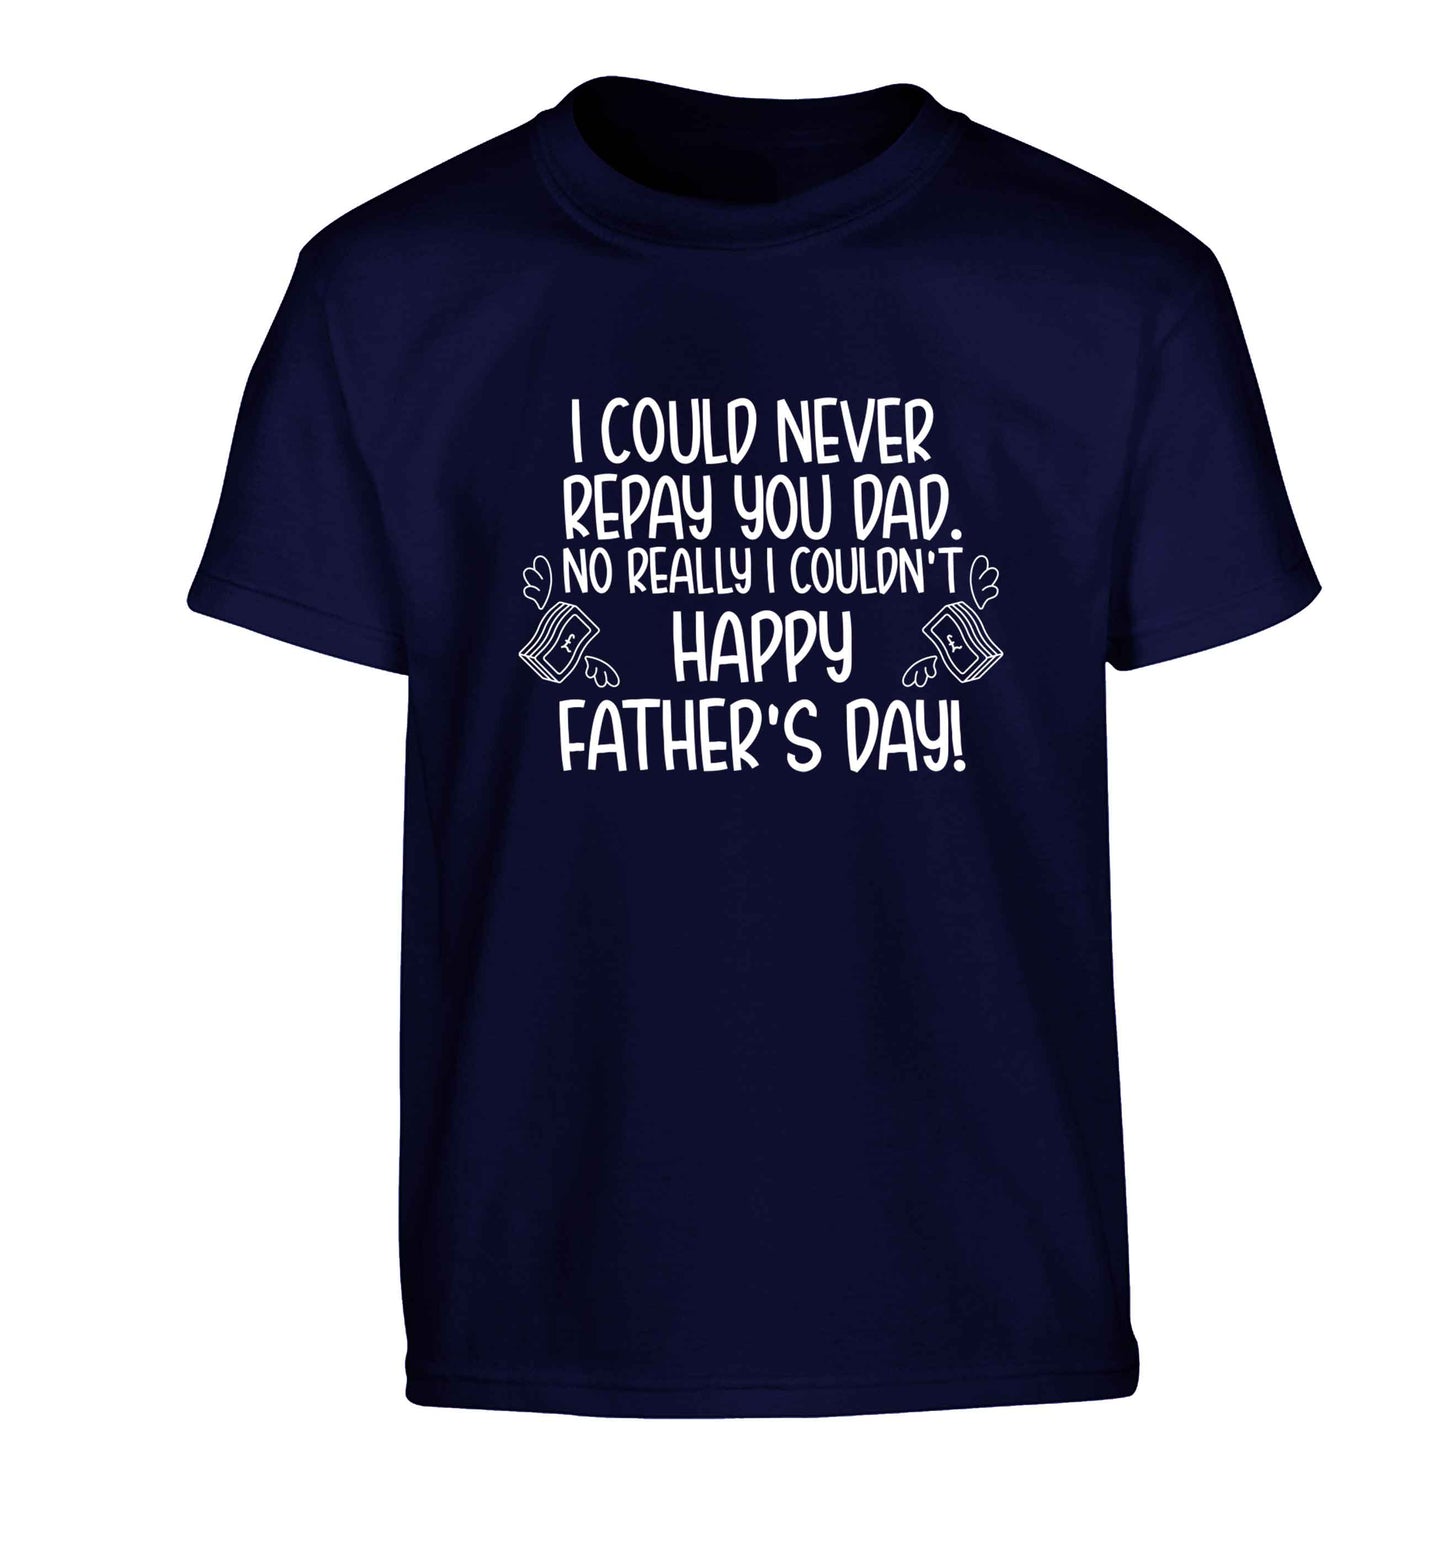 I could never repay you dad. No I really couldn't happy Father's day! Children's navy Tshirt 12-13 Years